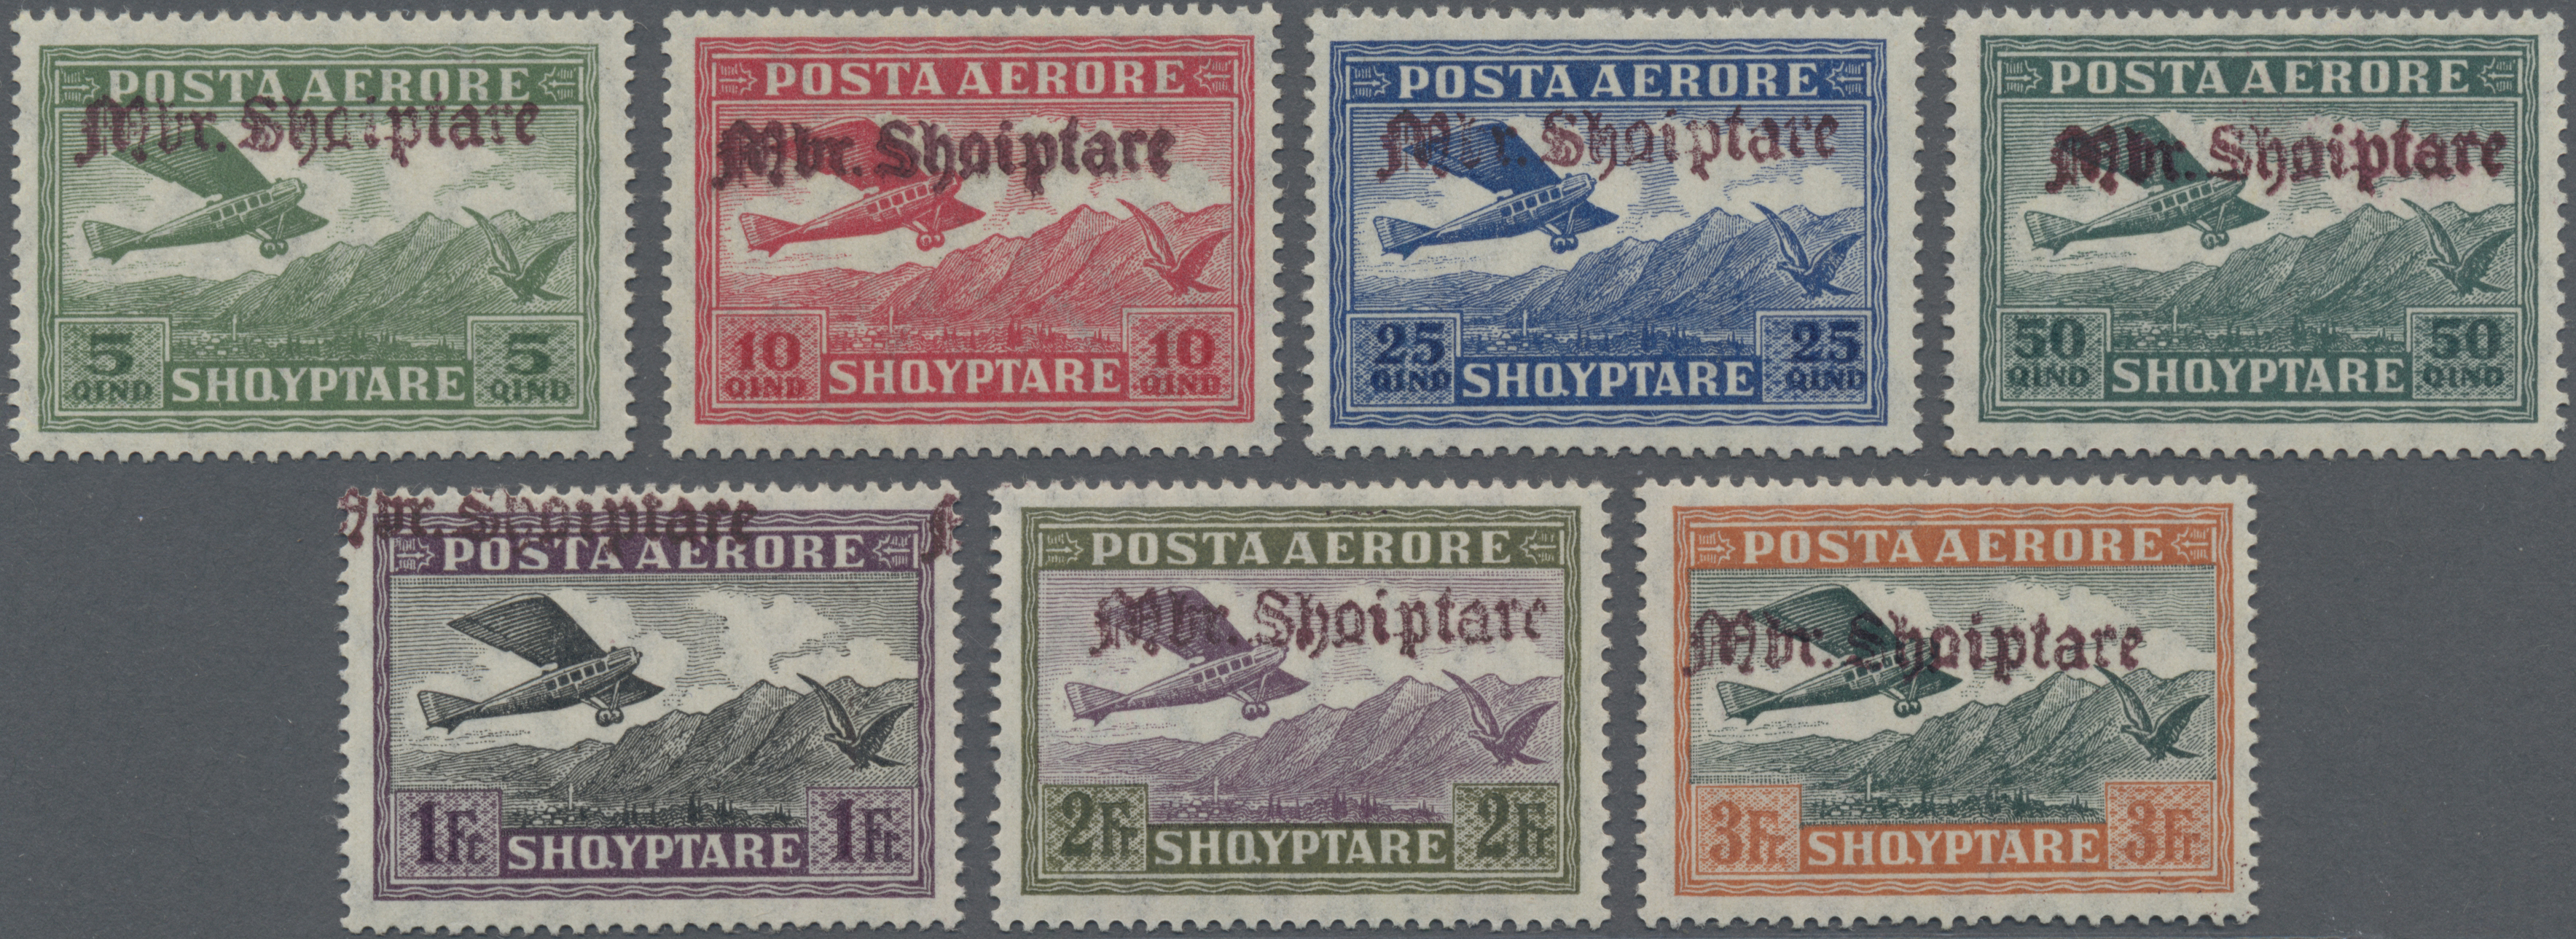 Lot 03160 - flugpost europa  -  Auktionshaus Christoph Gärtner GmbH & Co. KG 55th AUCTION - Day 2